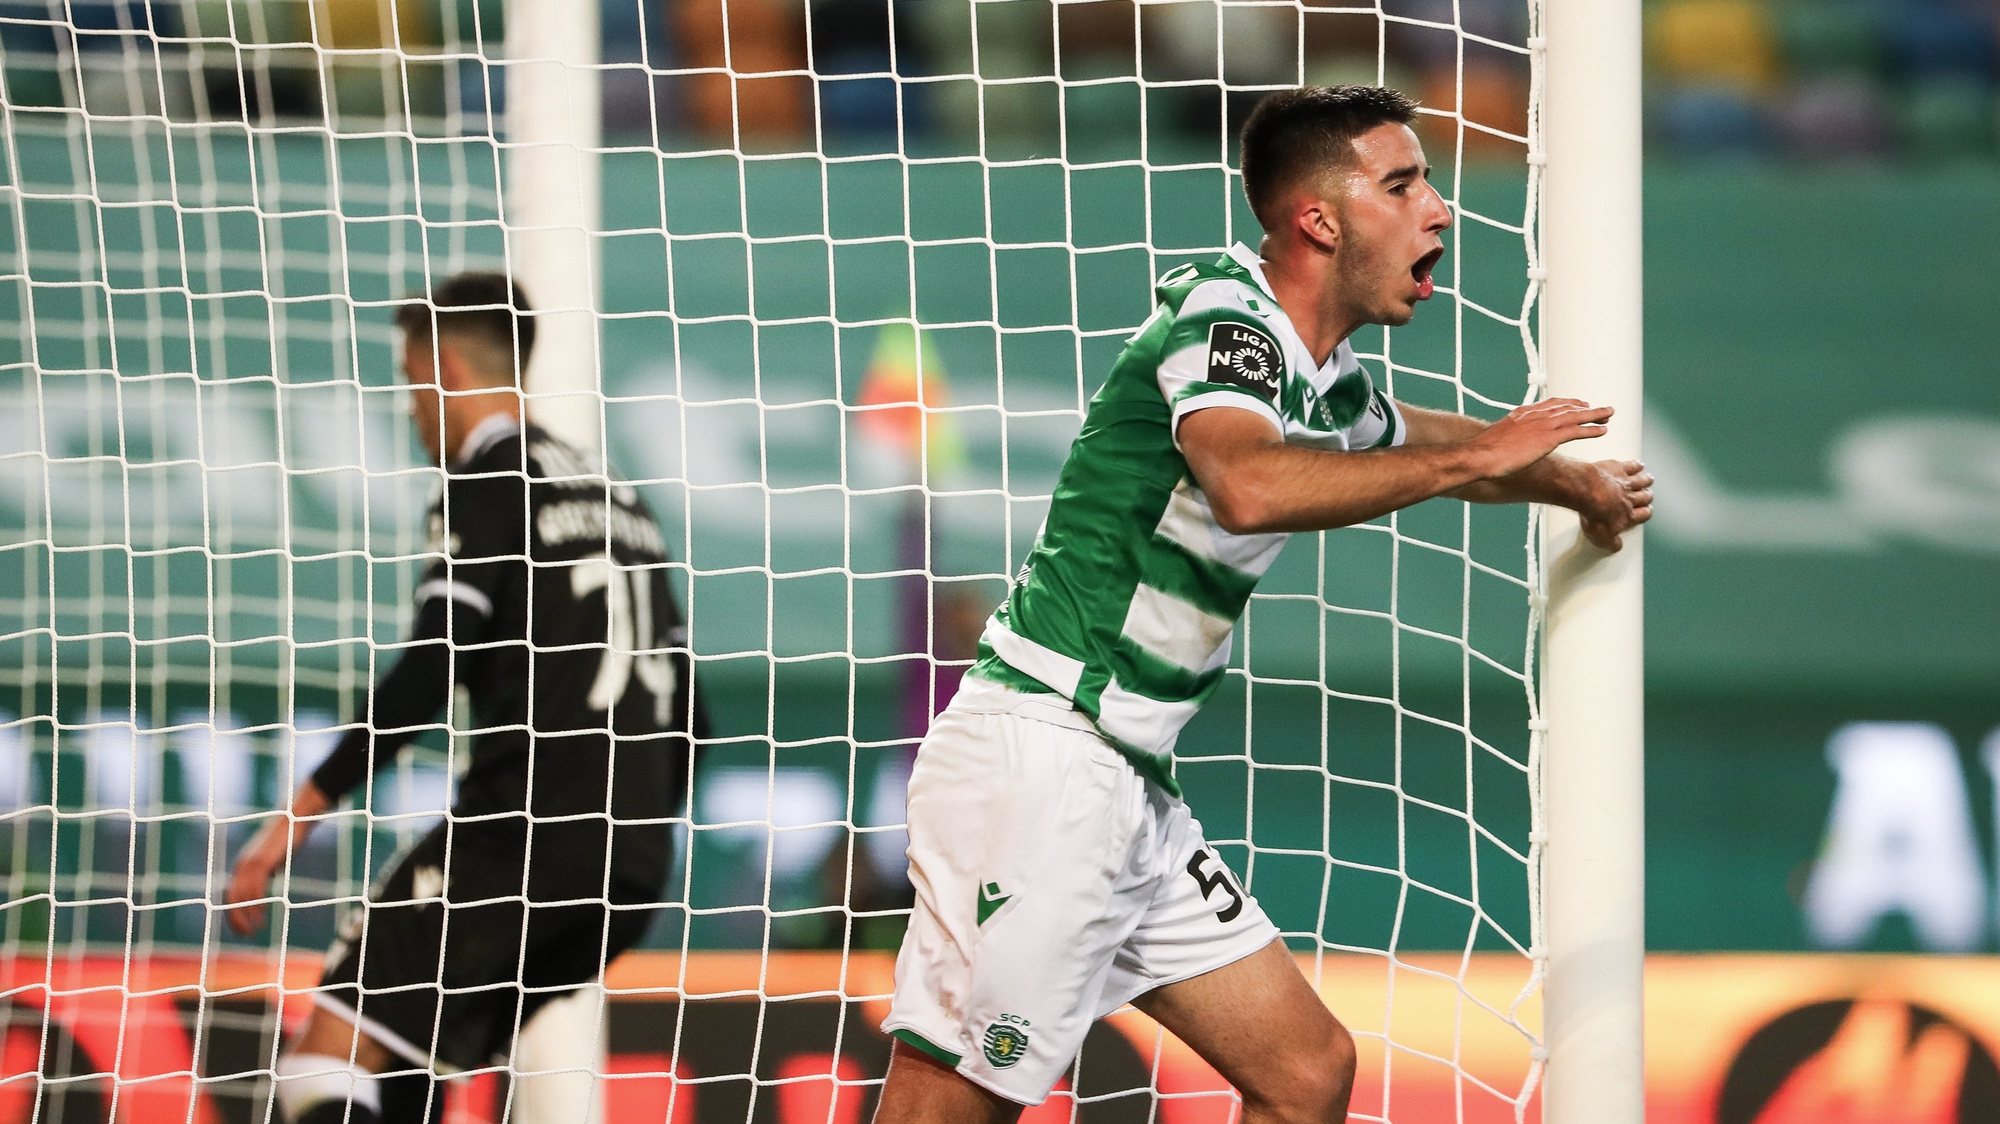 Sporting player Goncalo Inacio celebrates after scoring a goal against Vitoria de Guimaraes during their First League Soccer match held at Alvalade Stadium, in Lisbon, Portugal, 20 March 2021. JOSE SENA GOULAO/LUSA